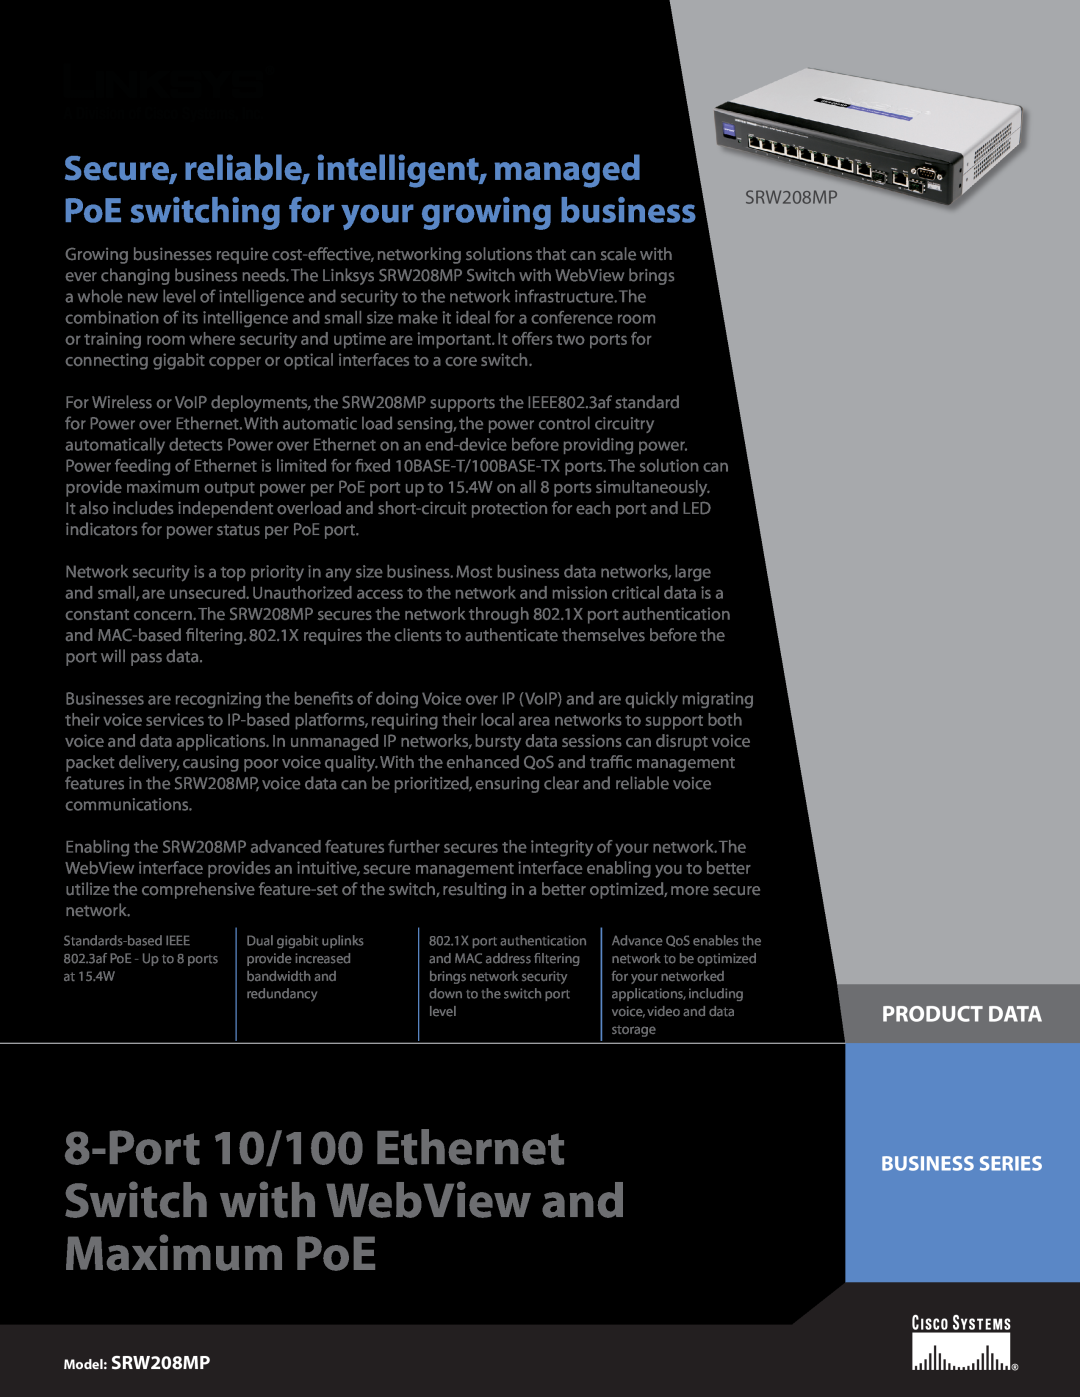 Linksys SRW208MP manual Business Series, Port 10/100 Ethernet Switch with WebView and Maximum PoE, Product Data 